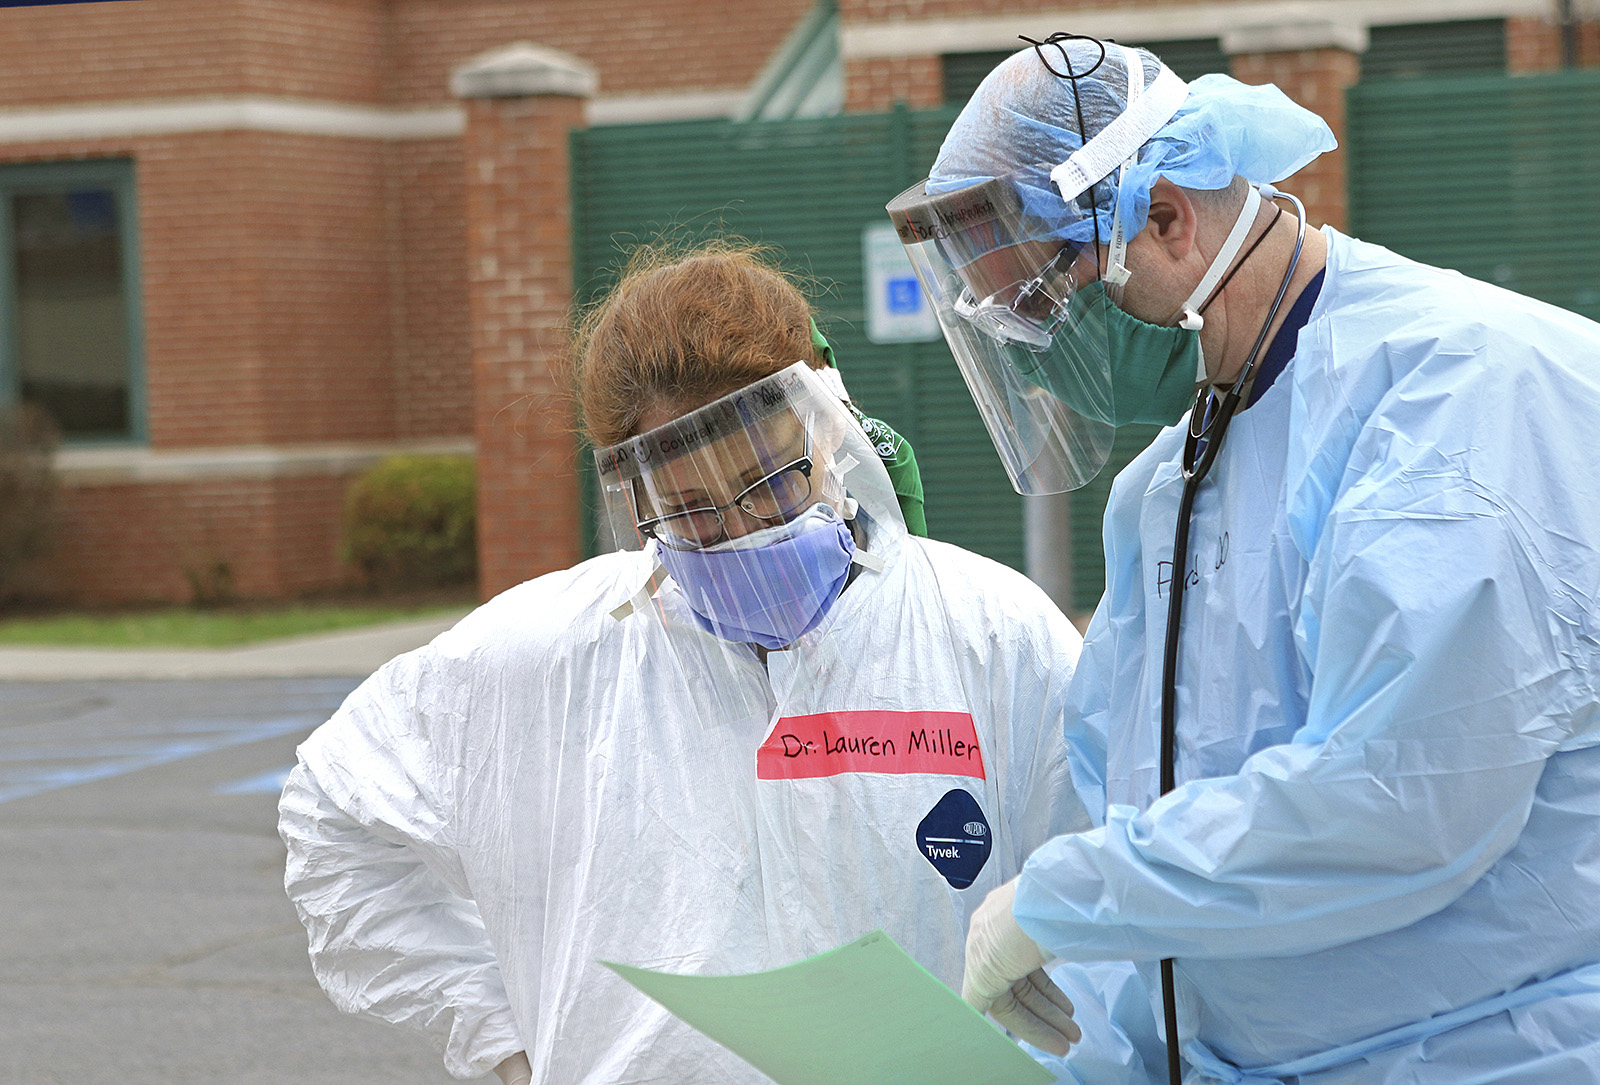 PHOTO: Dr. Lauren Miller, left, and Dr. Micah Moore look over notes at a Mobile Health Unit for drive-thru coronavirus testing at Robert C. Byrd Clinic on the campus of the West Virginia School of Osteopathic Medicine in Lewisburg, W.Va., March 24, 2020.